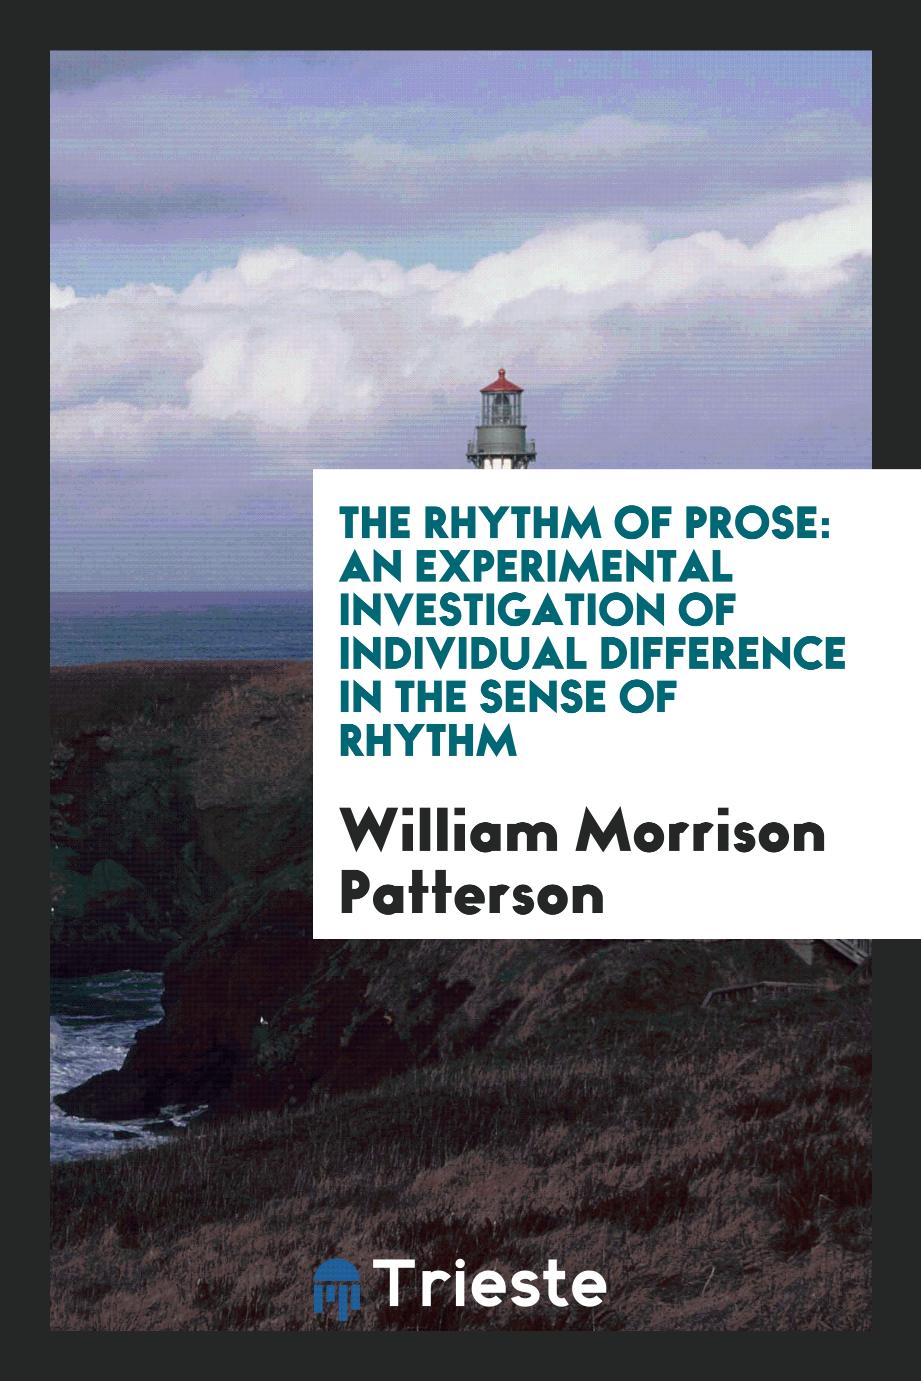 The rhythm of prose: an experimental investigation of individual difference in the sense of rhythm